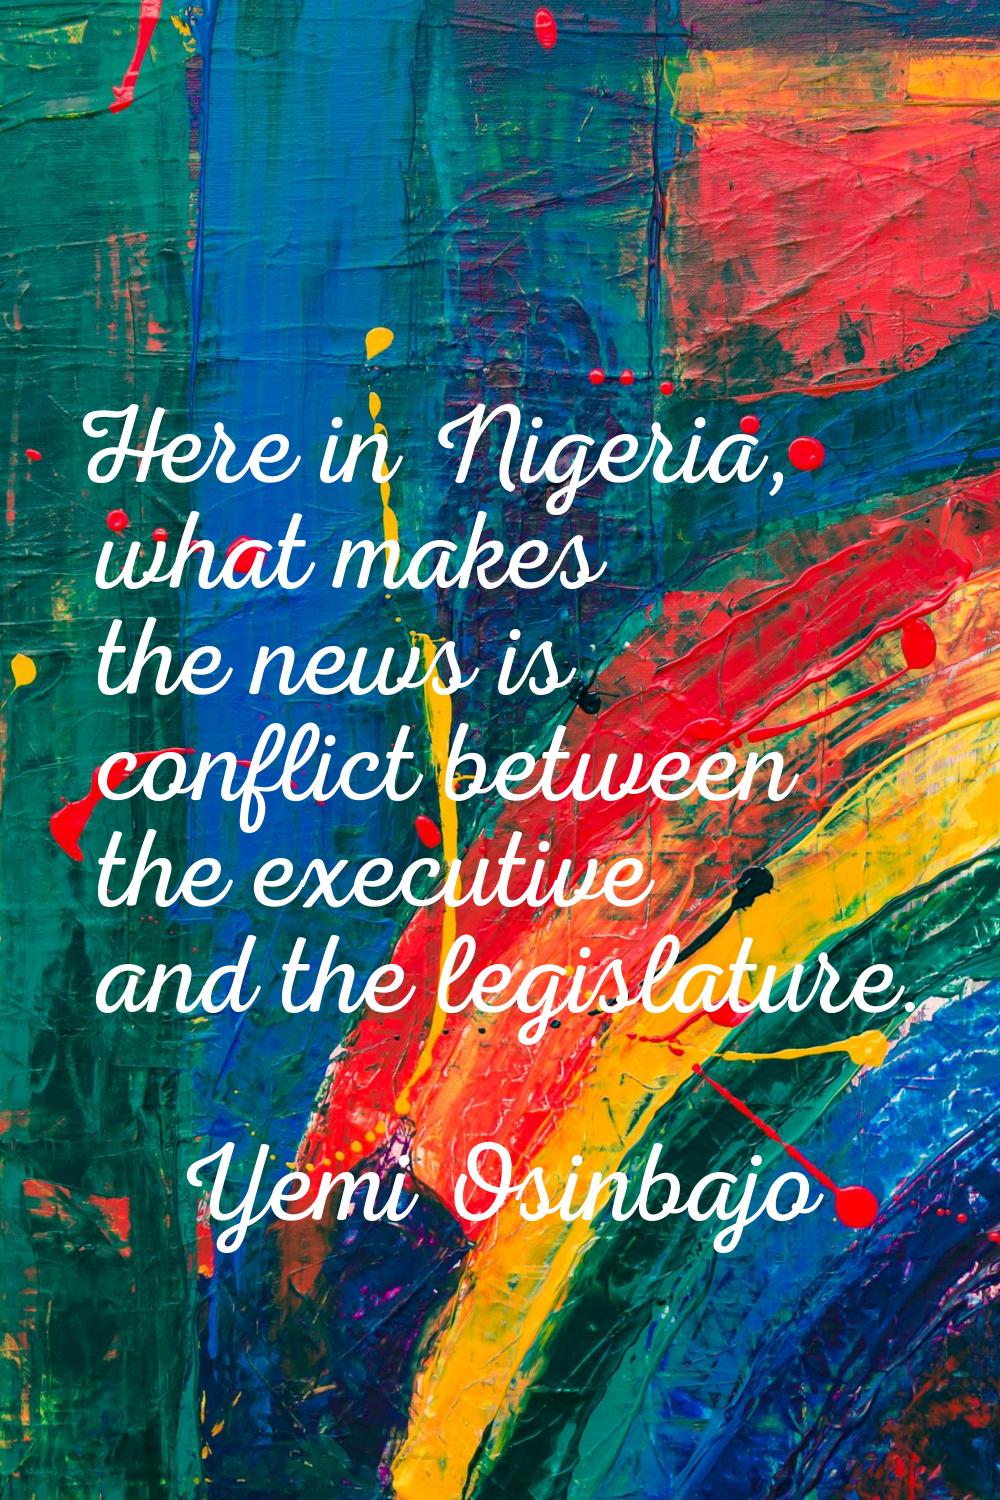 Here in Nigeria, what makes the news is conflict between the executive and the legislature.